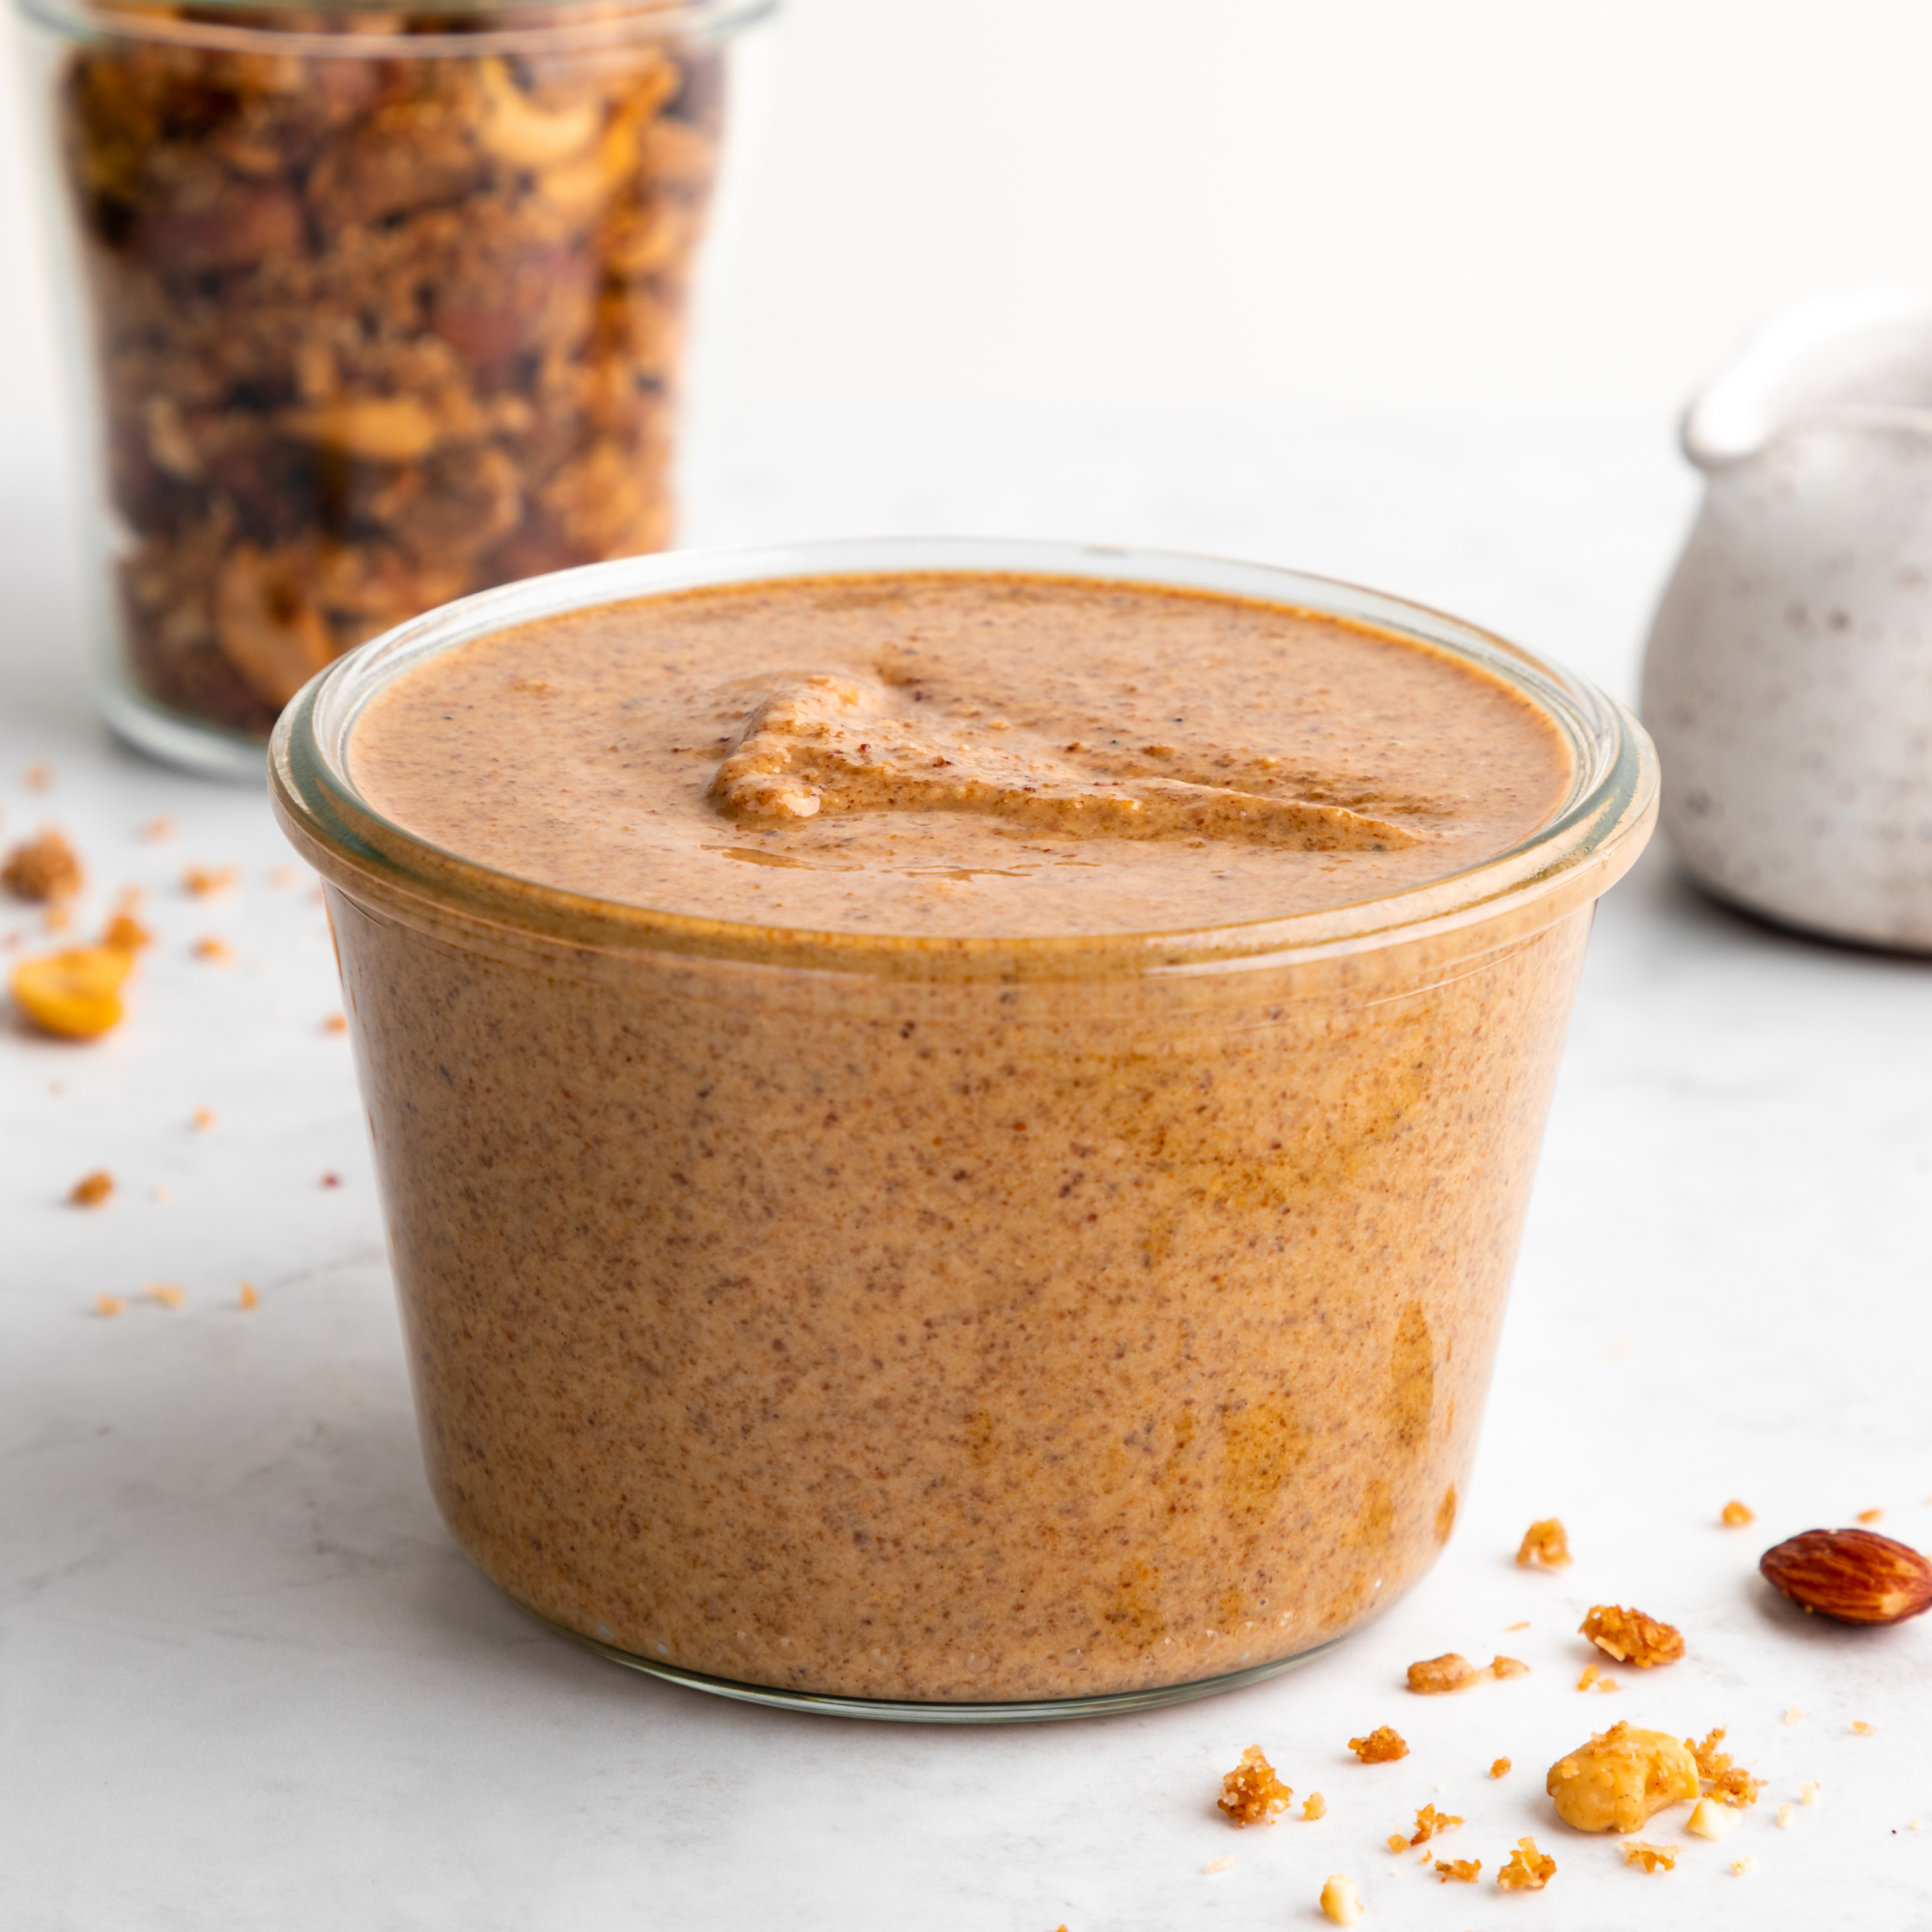 Ultimate Almond Cow Granola Butter made with Almond Cow ingredients!